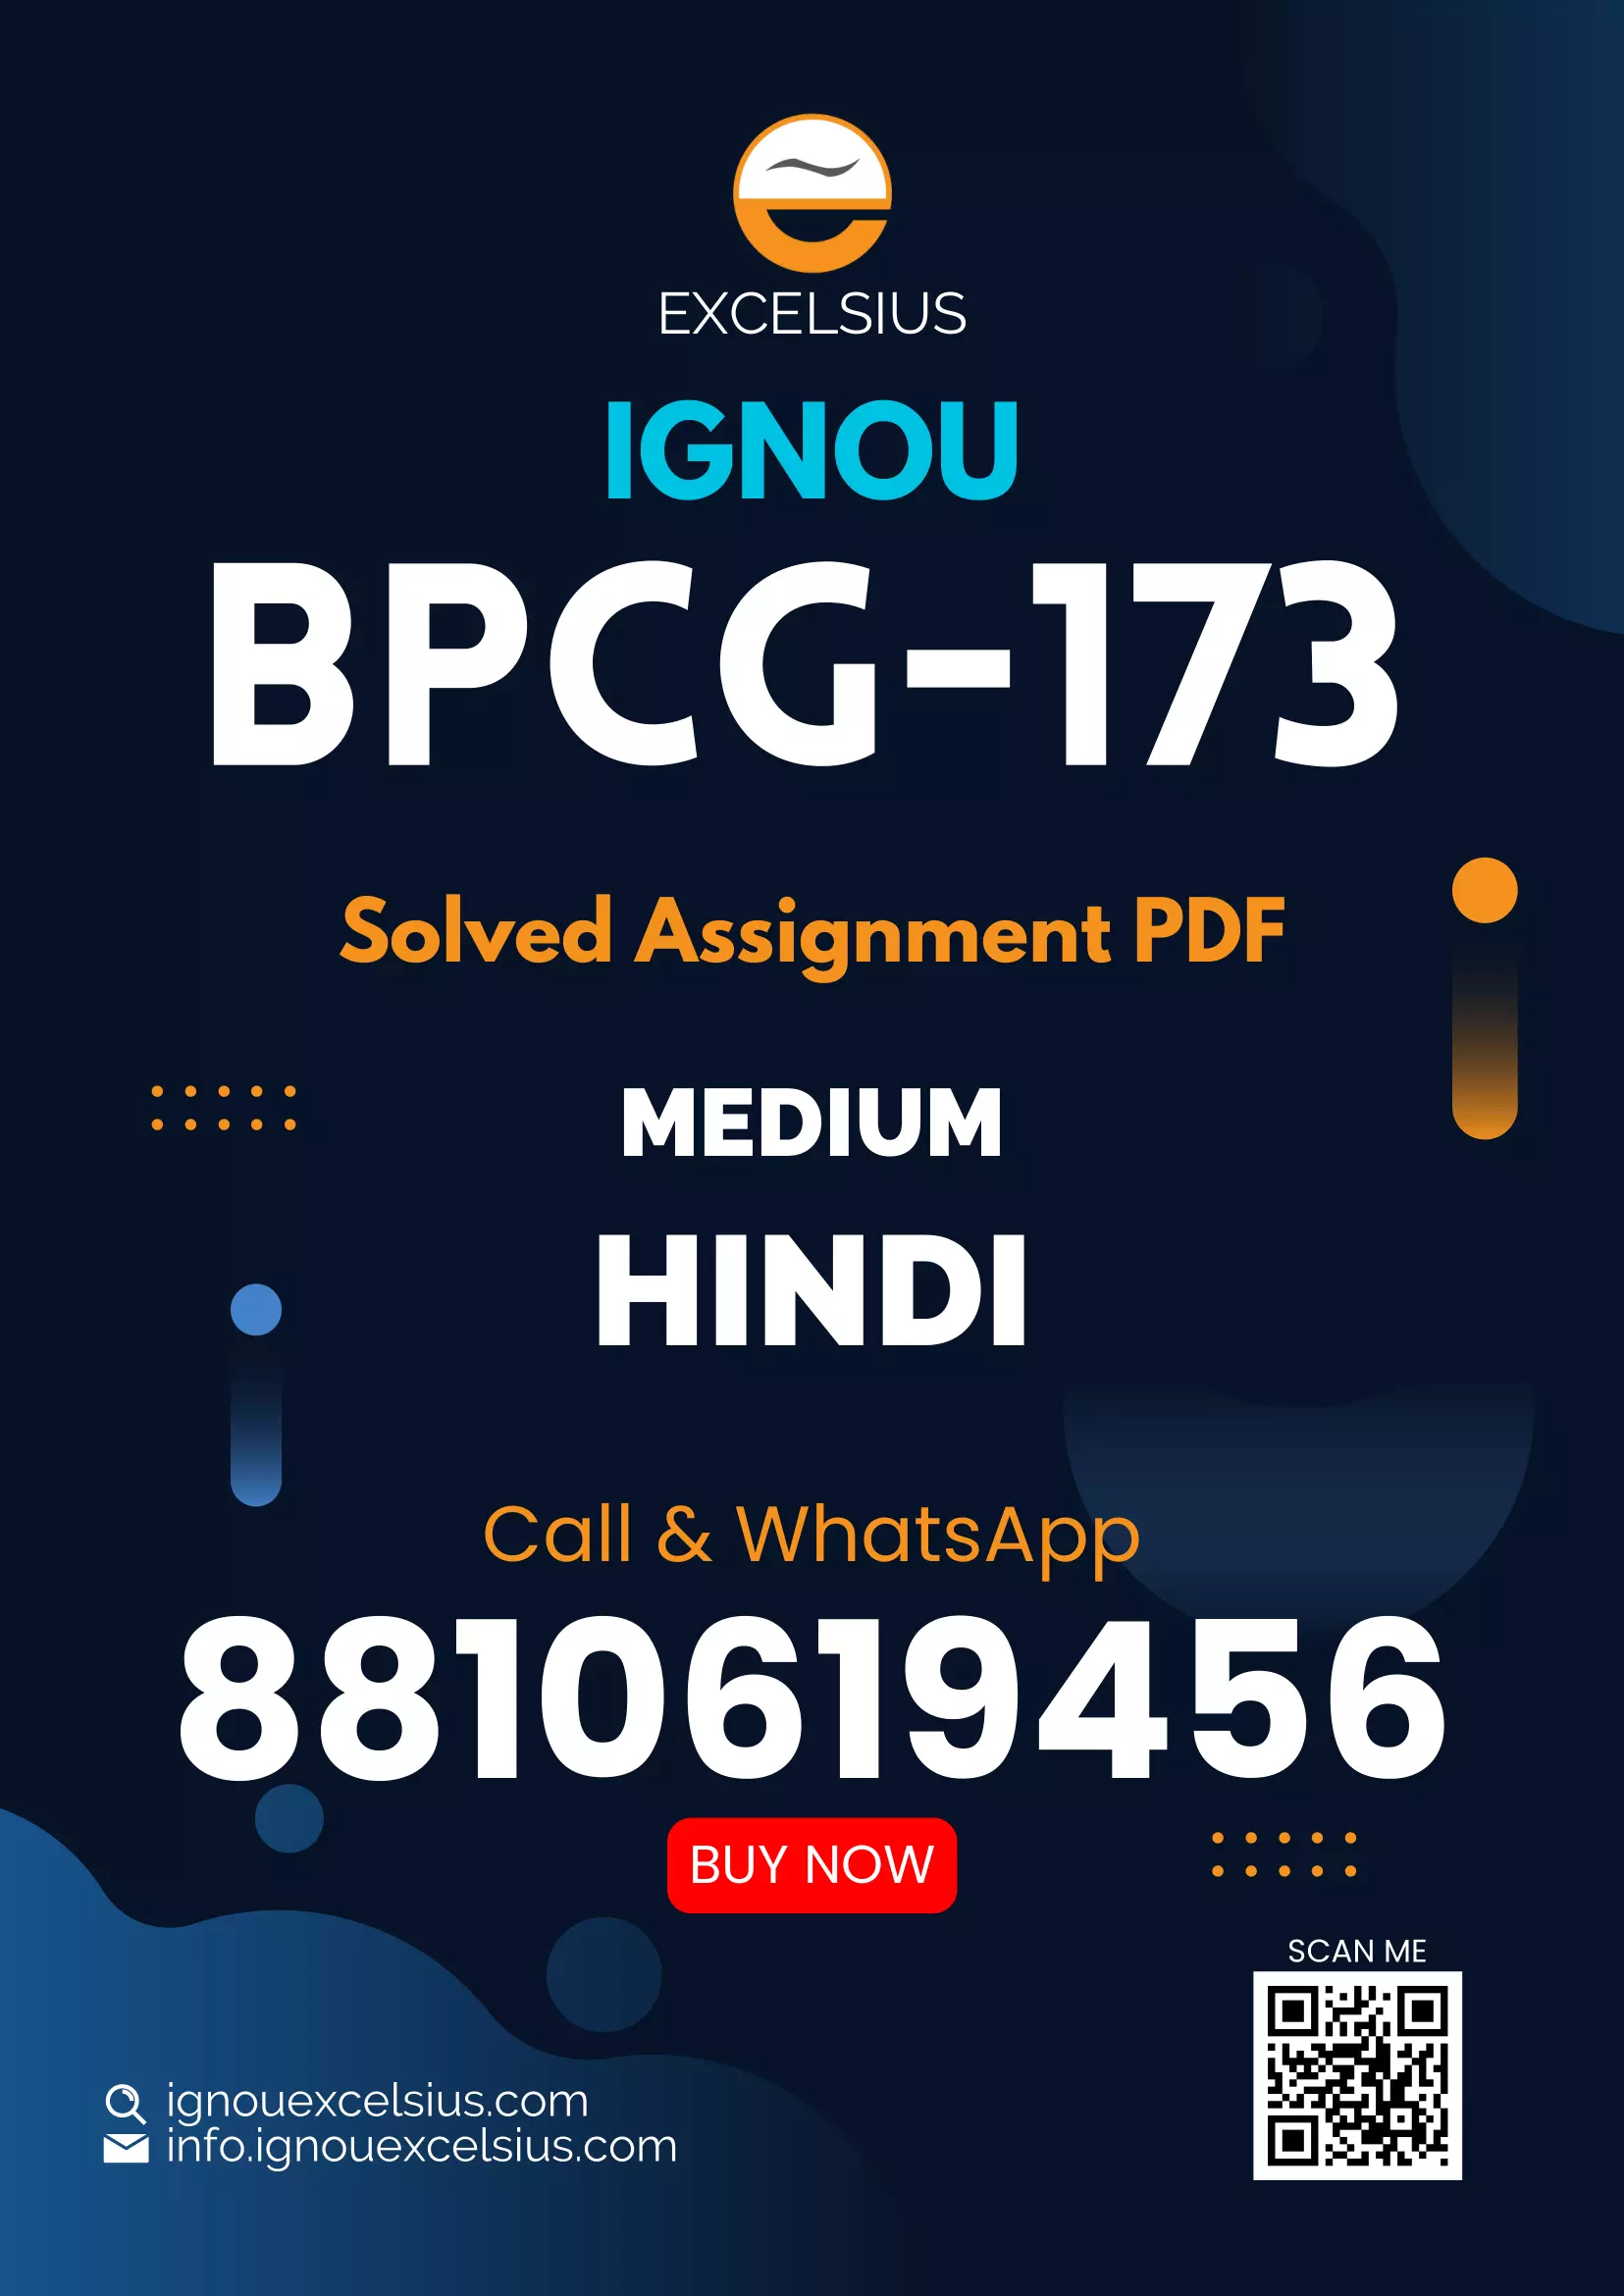 IGNOU BPCG-173 - Psychology for Health and Well Being, Latest Solved Assignment -July 2022 – January 2023